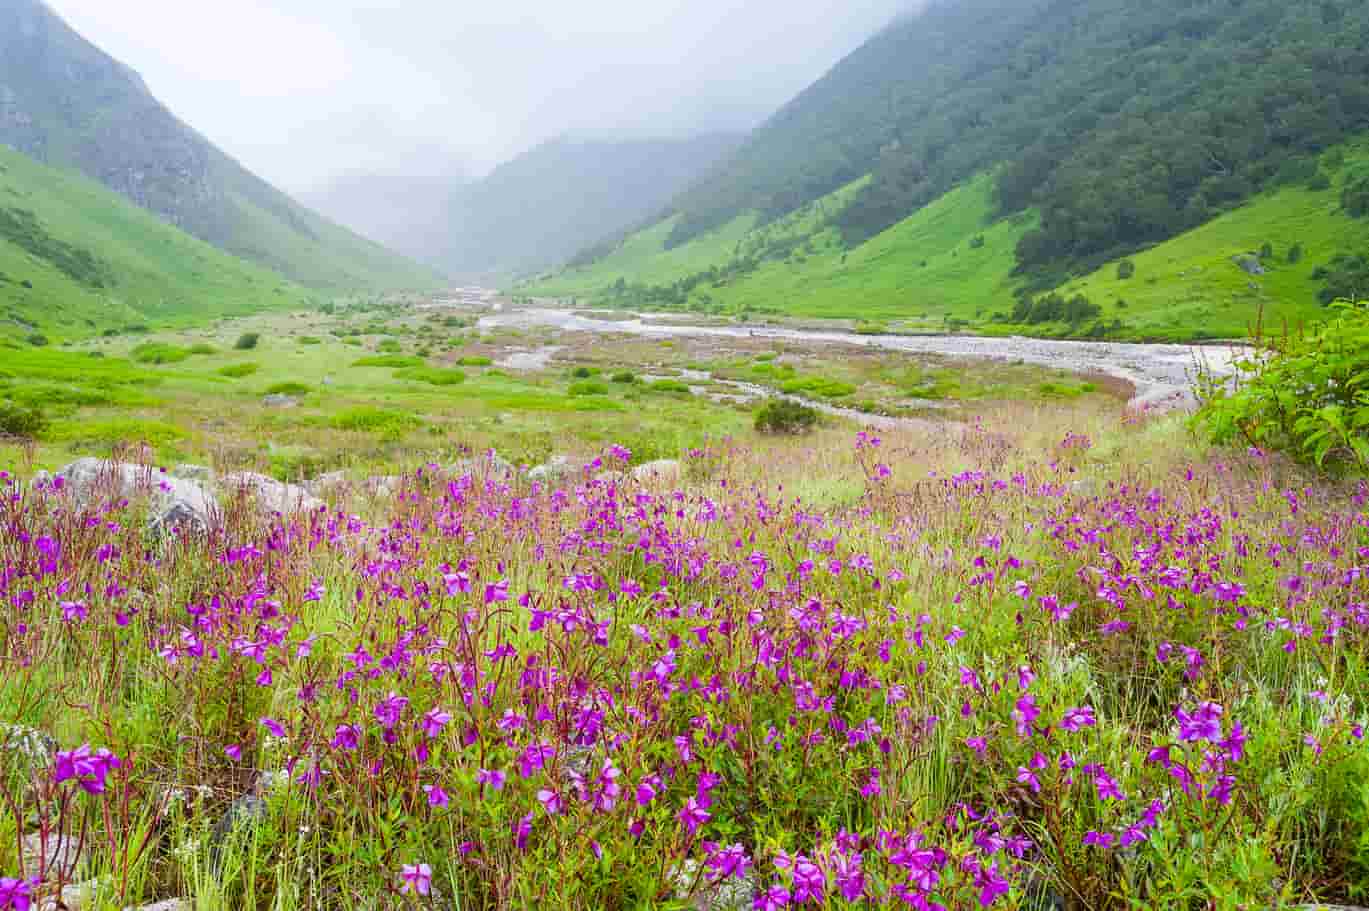 All About the Valley of Flowers, Valley of Flowers Trek